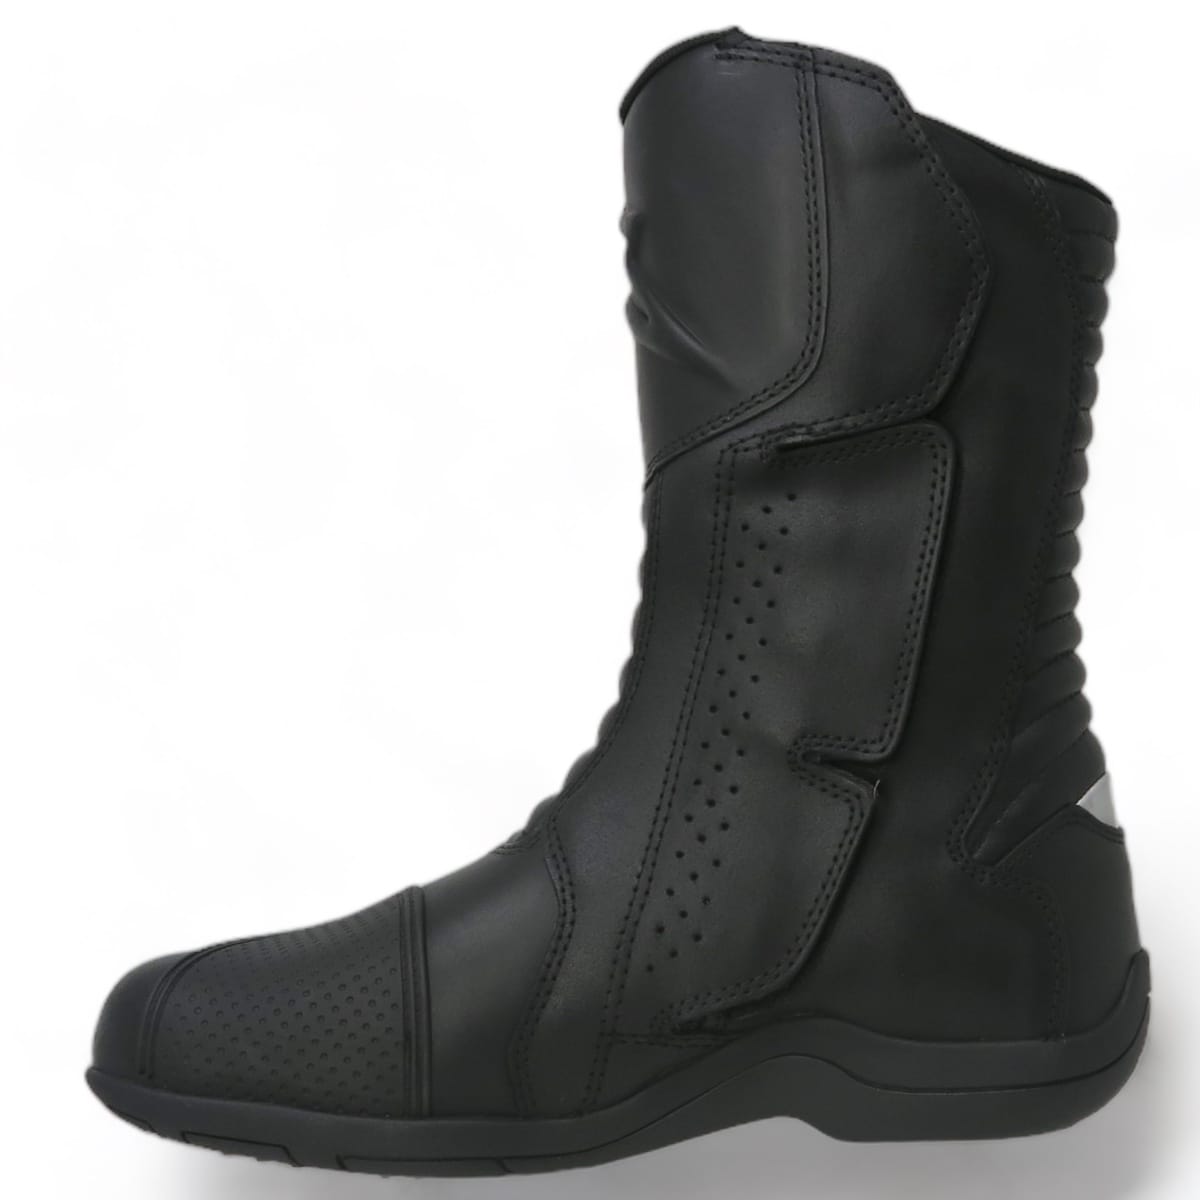 Alpinestars Web Gore-Tex Motorcycle Boots: The standard-setter for waterproof leather touring boots - Inside zip opening